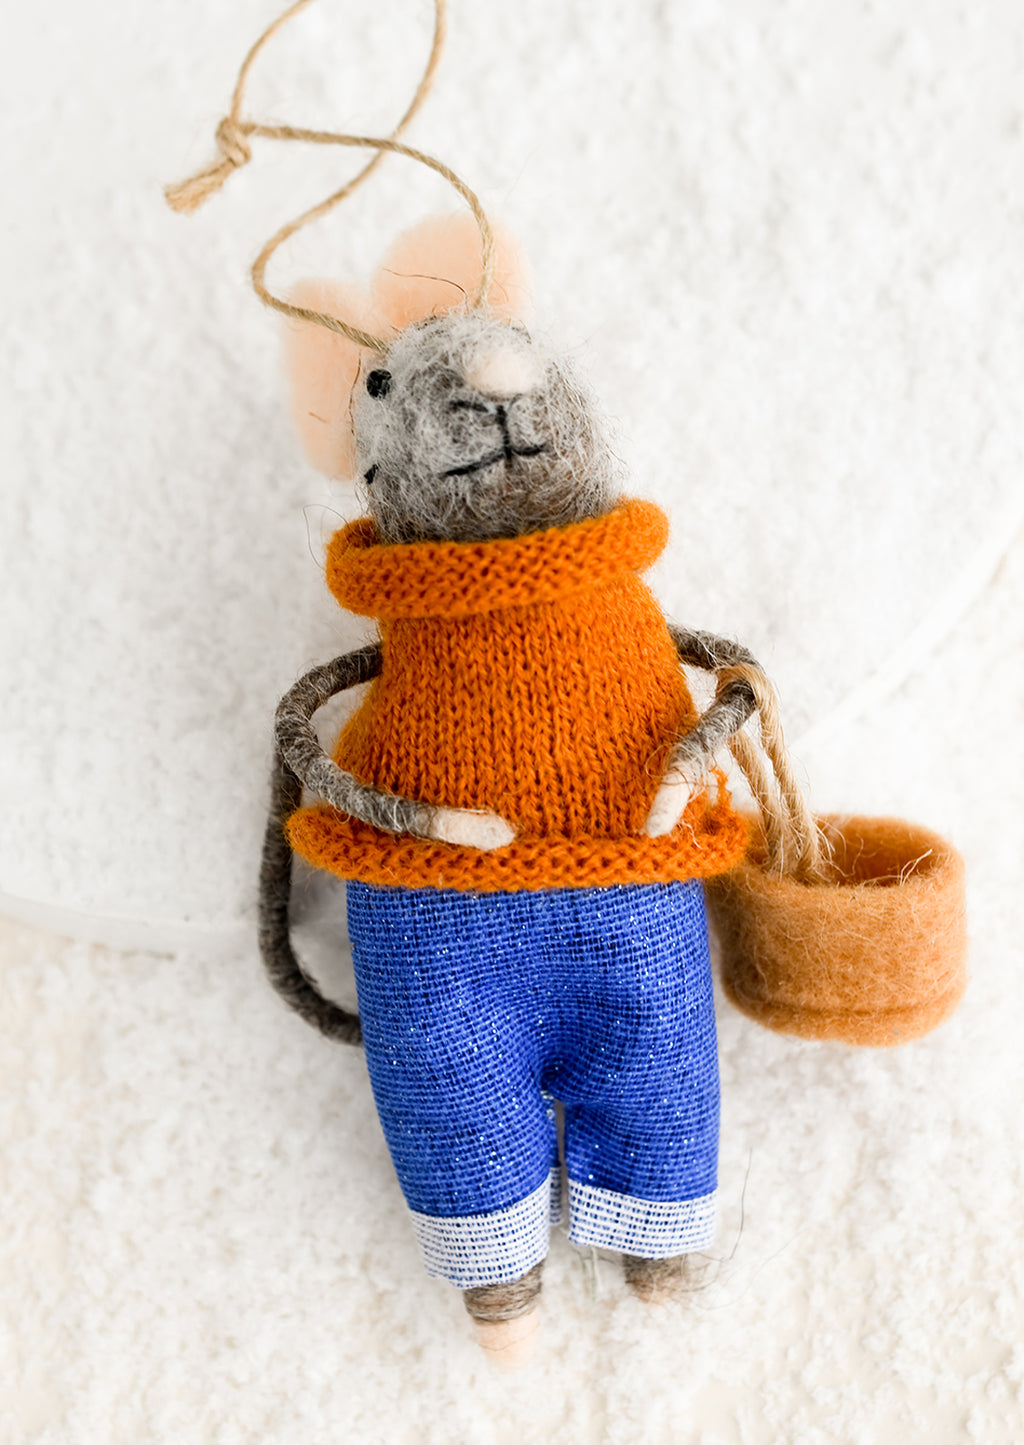 Basket: A felted mouse ornament wearing a sweater and holding a basket.